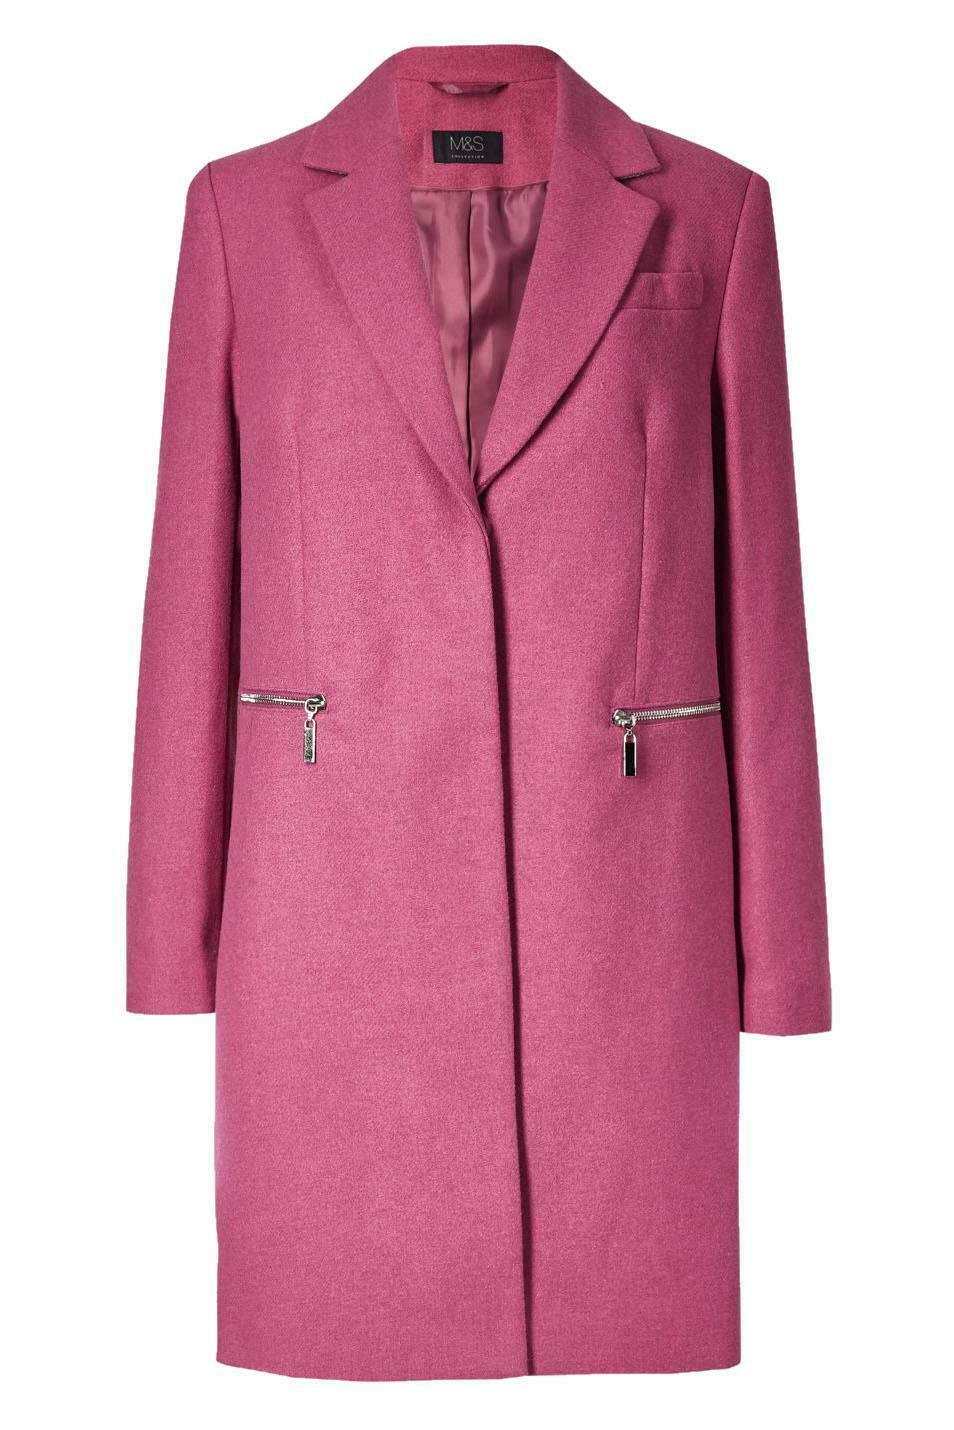 M&S Wool Blend Single Breasted Pink Brown Winter Coat Holly Willoughby ...